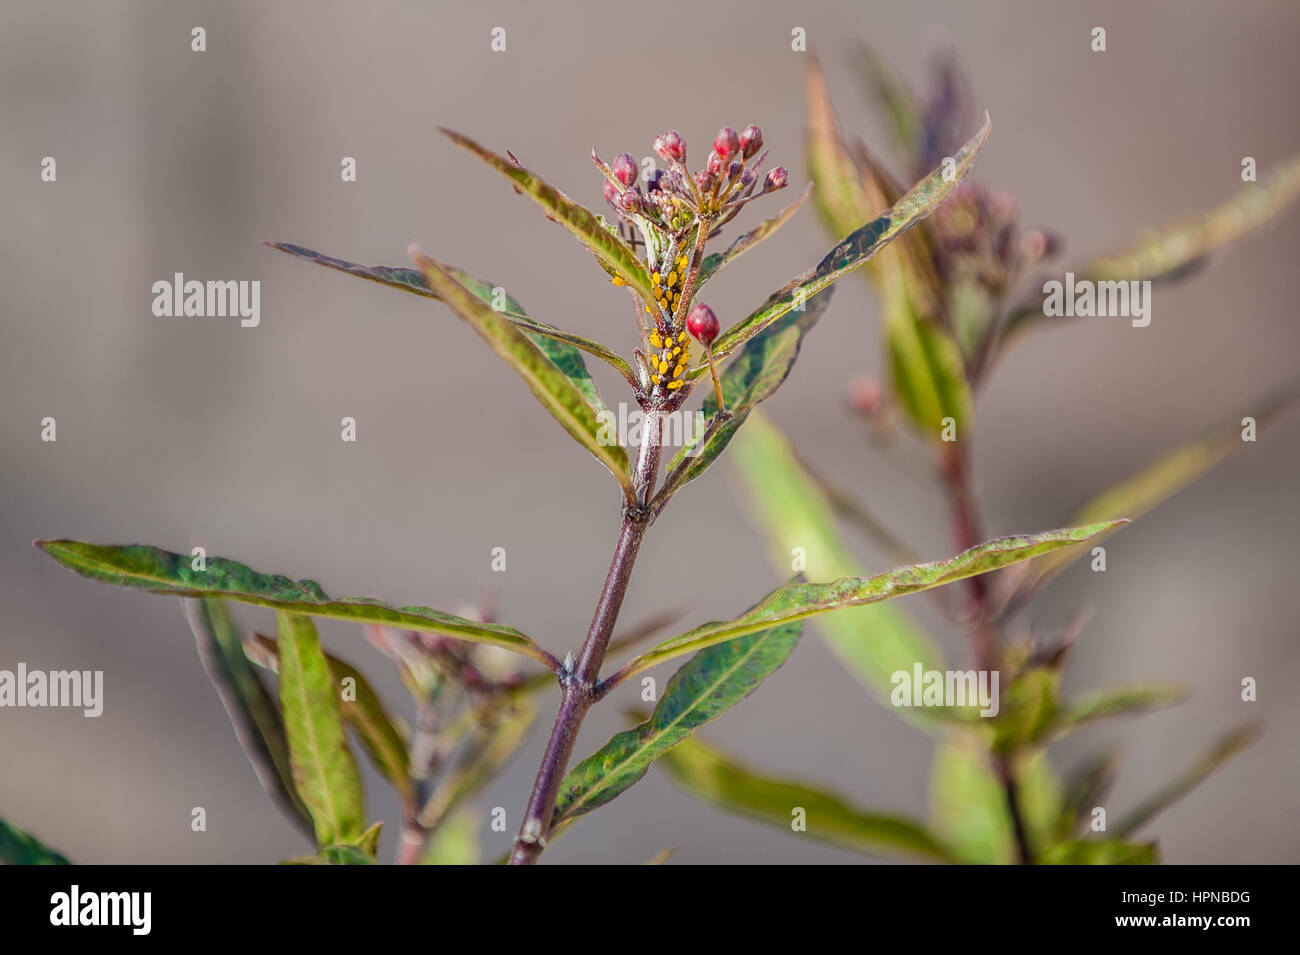 Young and unwanted aphids infesting and clinging to wild milkweed plant. Stock Photo